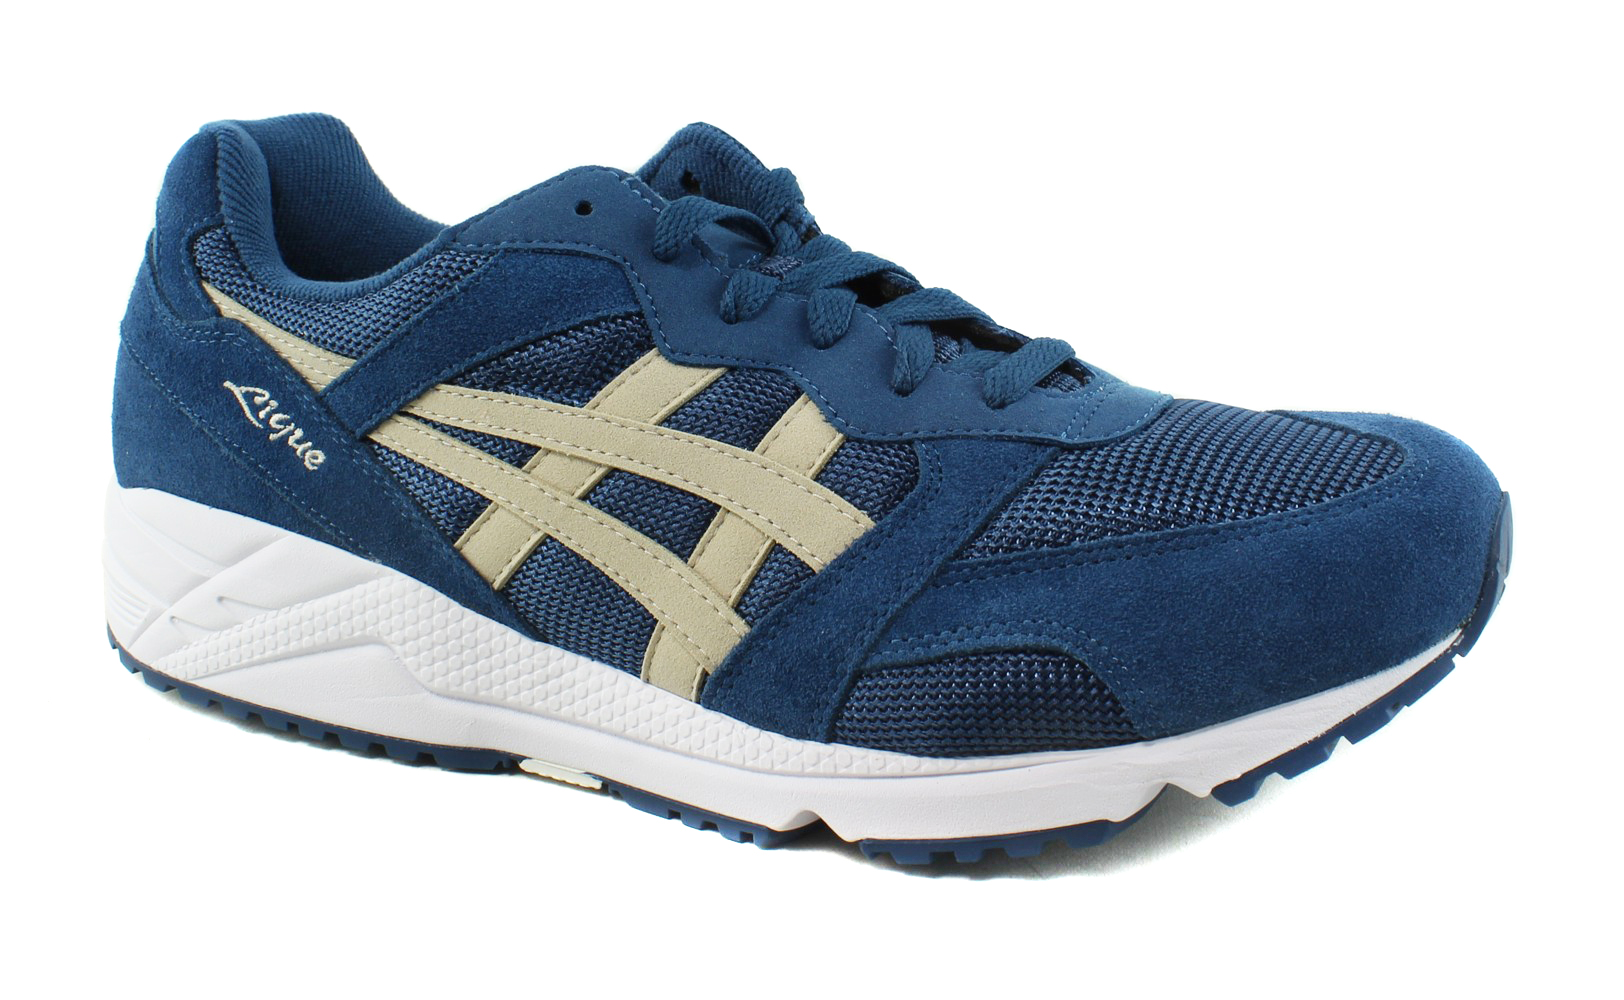 ASICS Mens Gel-Lique Suede Running Casual Sneaker Shoes - image 1 of 4